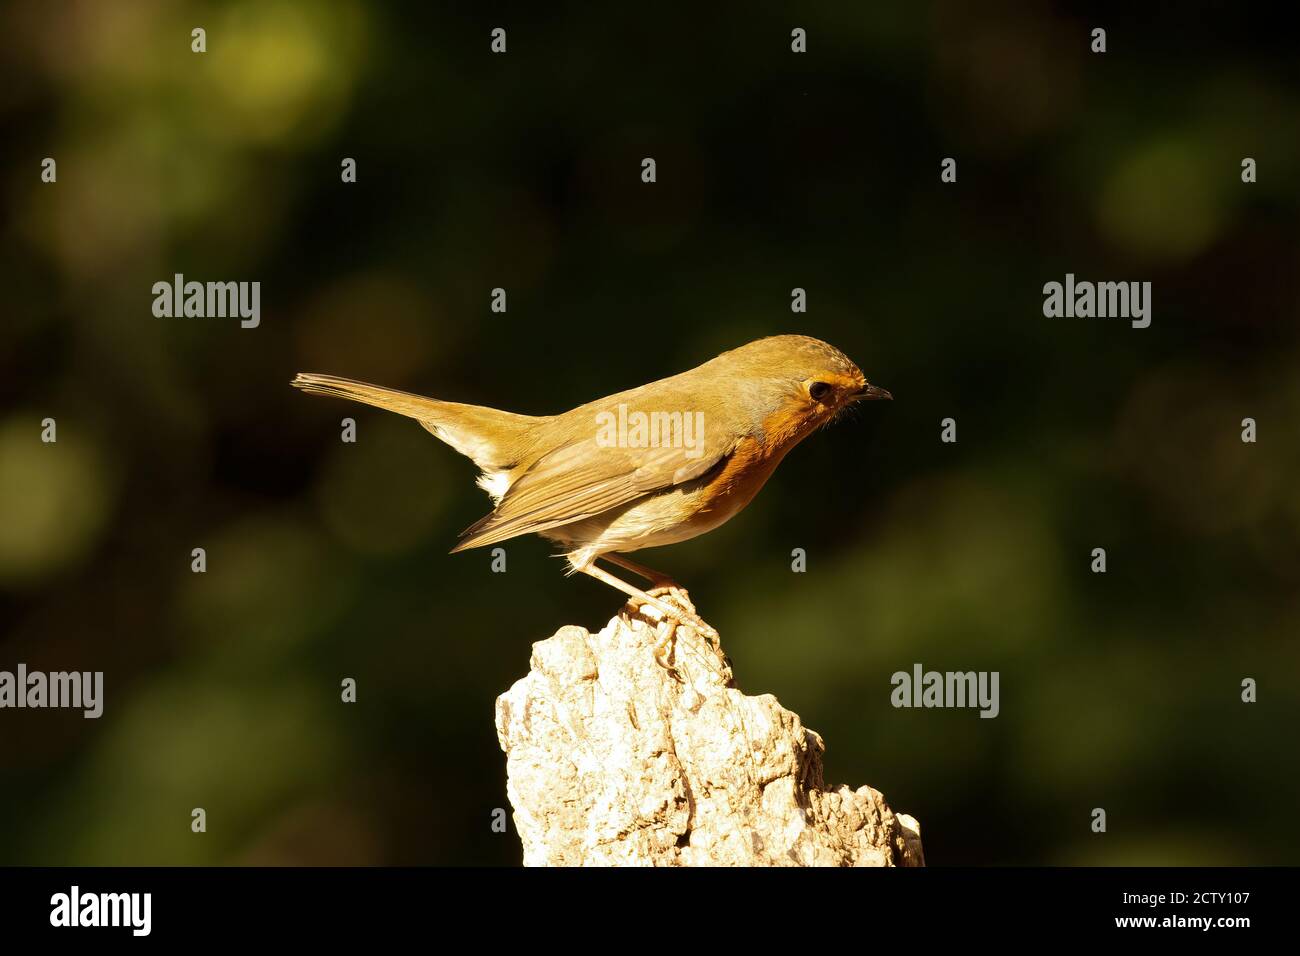 Highlighted Robin redbreast, Erithacus rubecula, perched on tree stump with green bokeh background Stock Photo